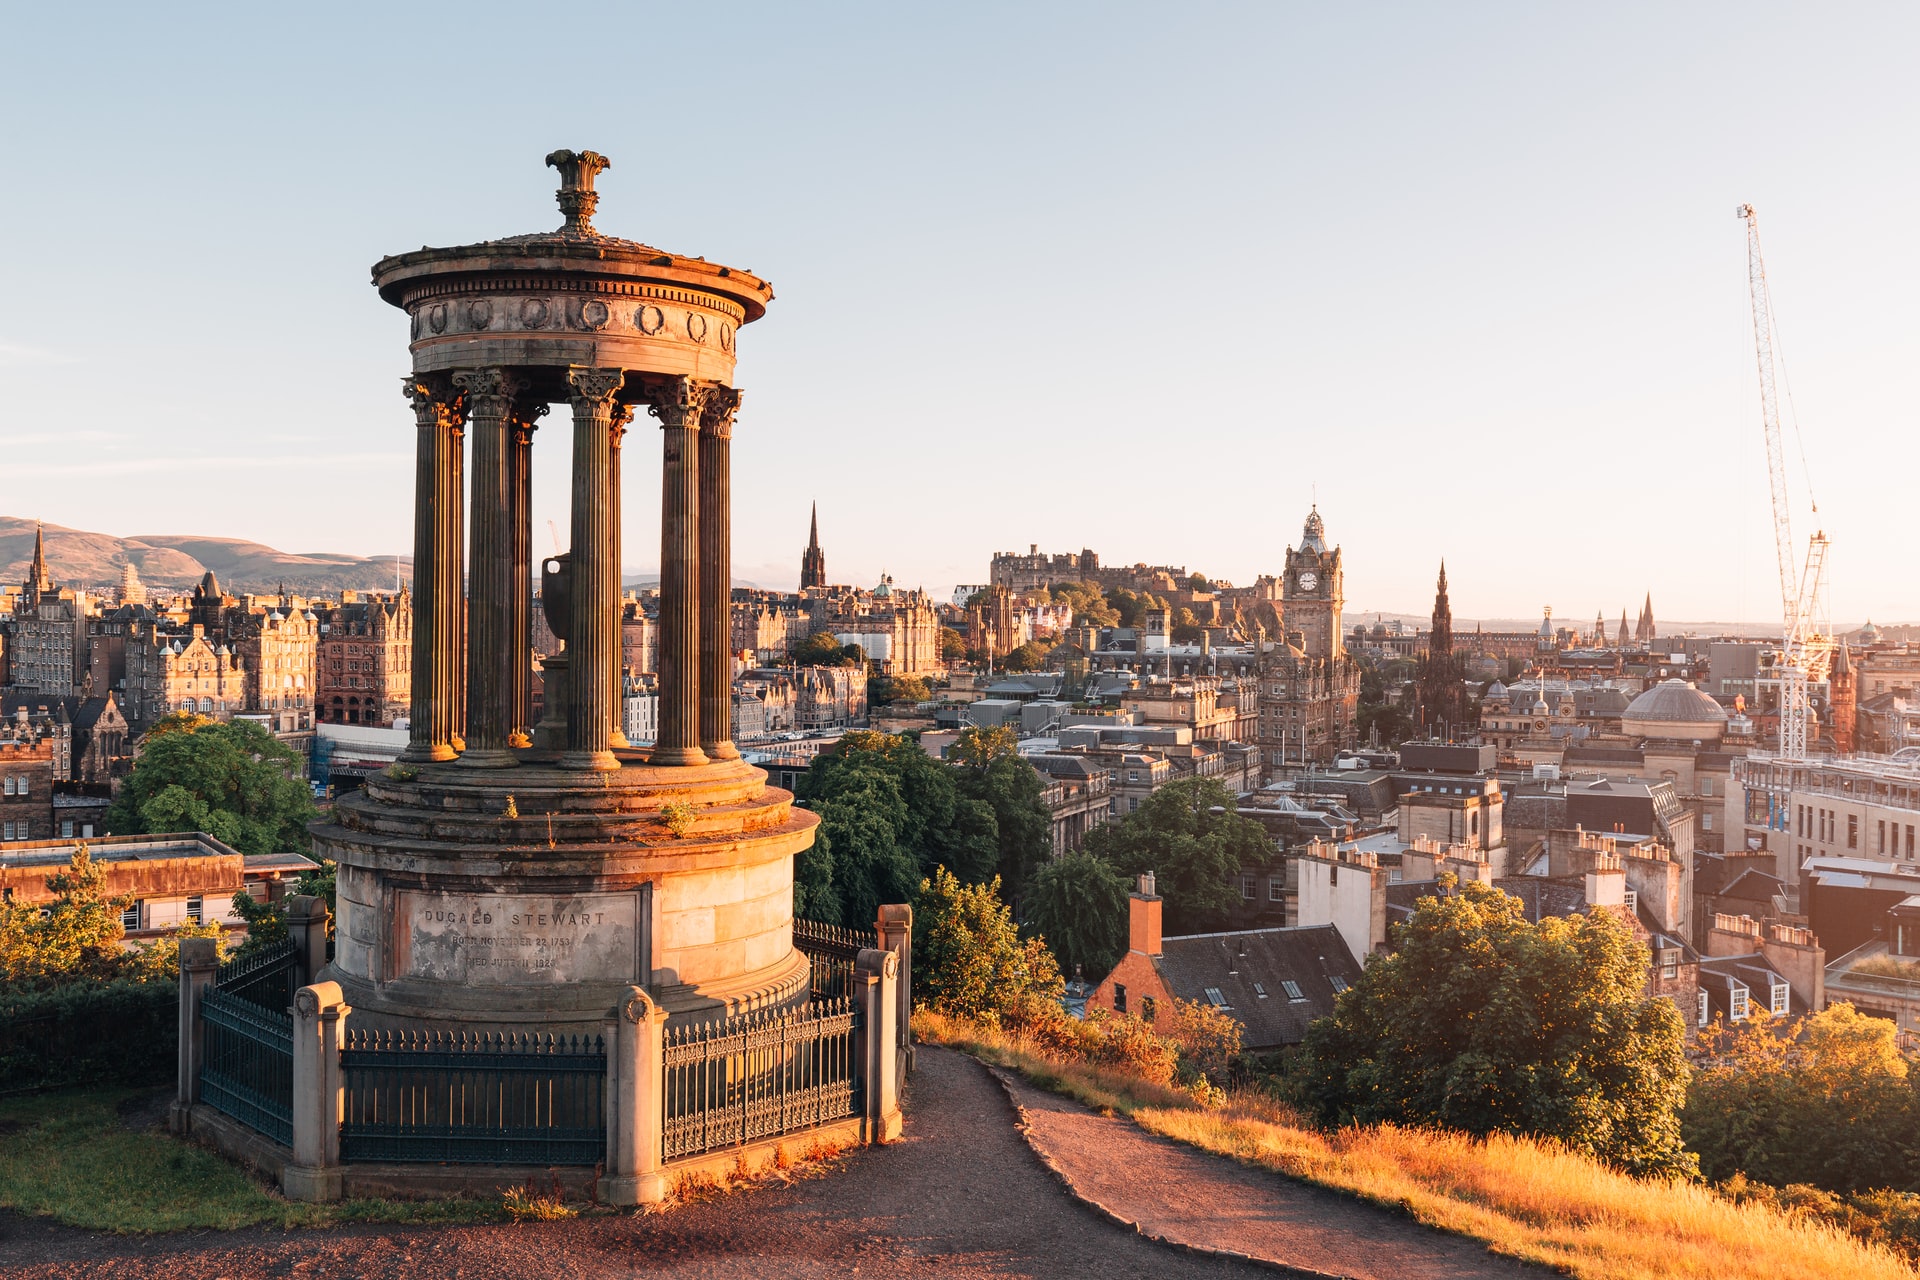 The Edinburgh skyline from Calton Hill at sunset on a clear day.